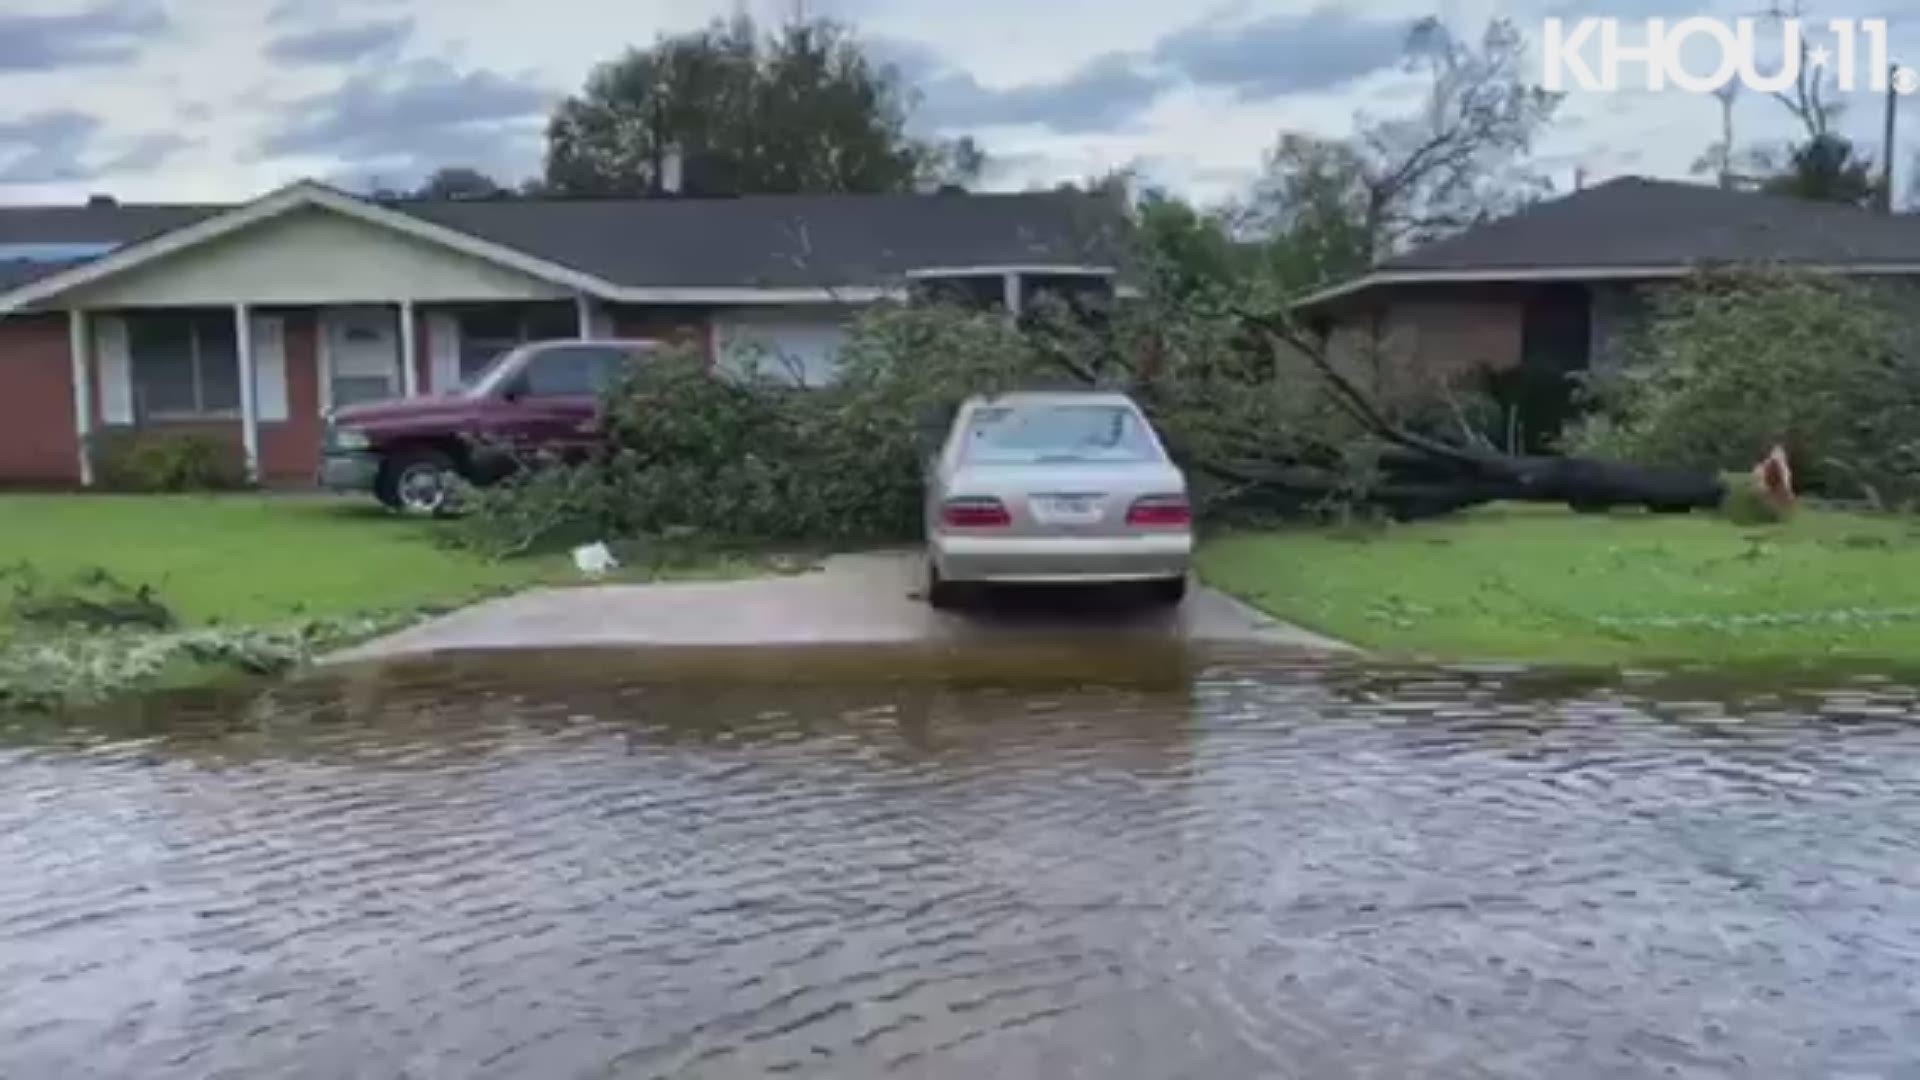 KHOU reporter Janelle Bludau shot this video from Orange, Texas, after Hurricane Laura moved through overnight.